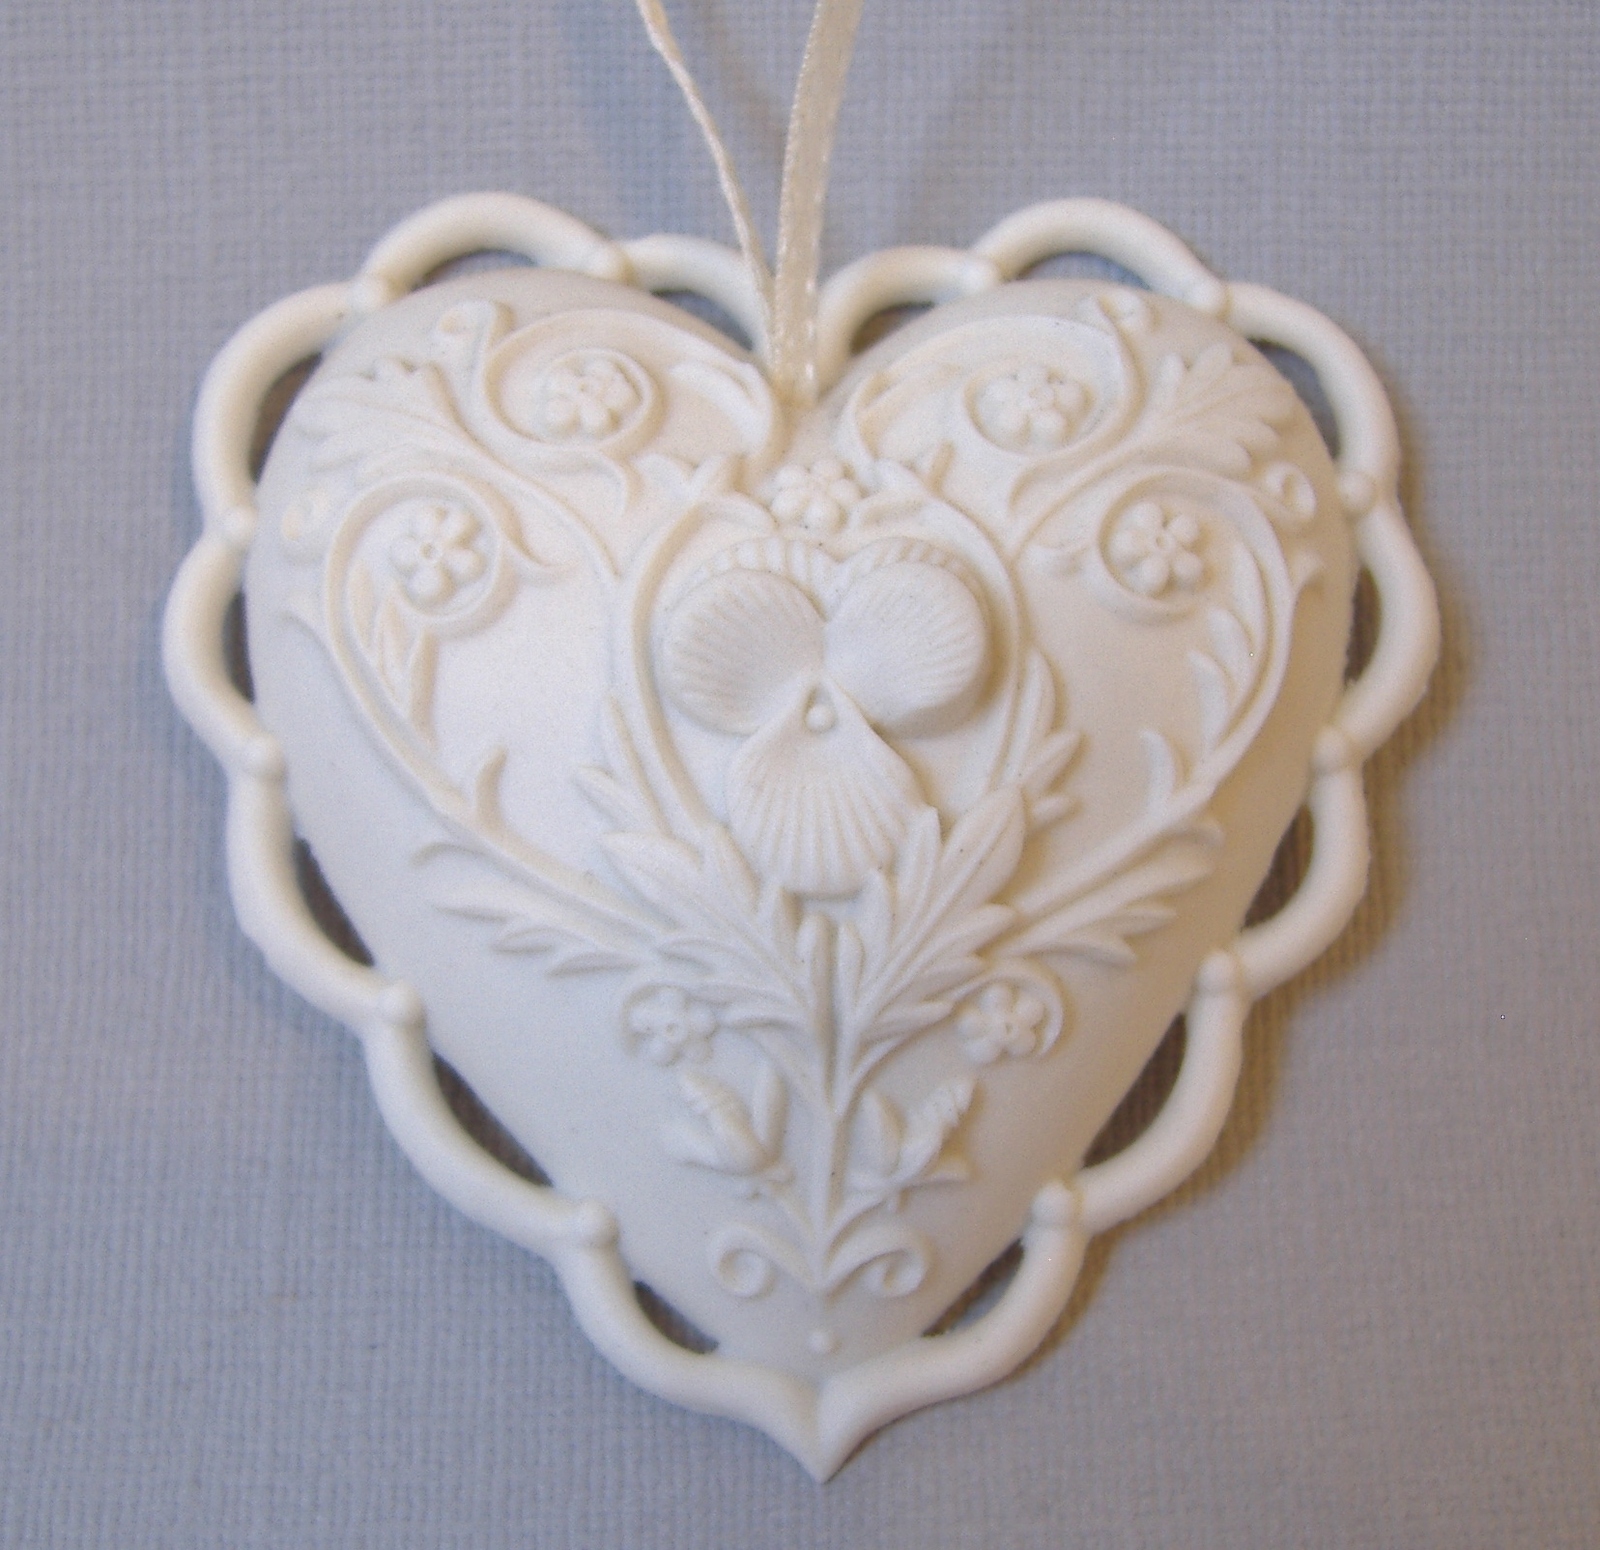 Primary image for From The Heart Margaret Furlong 1997 Ornate White Porcelain Victorian Ornament